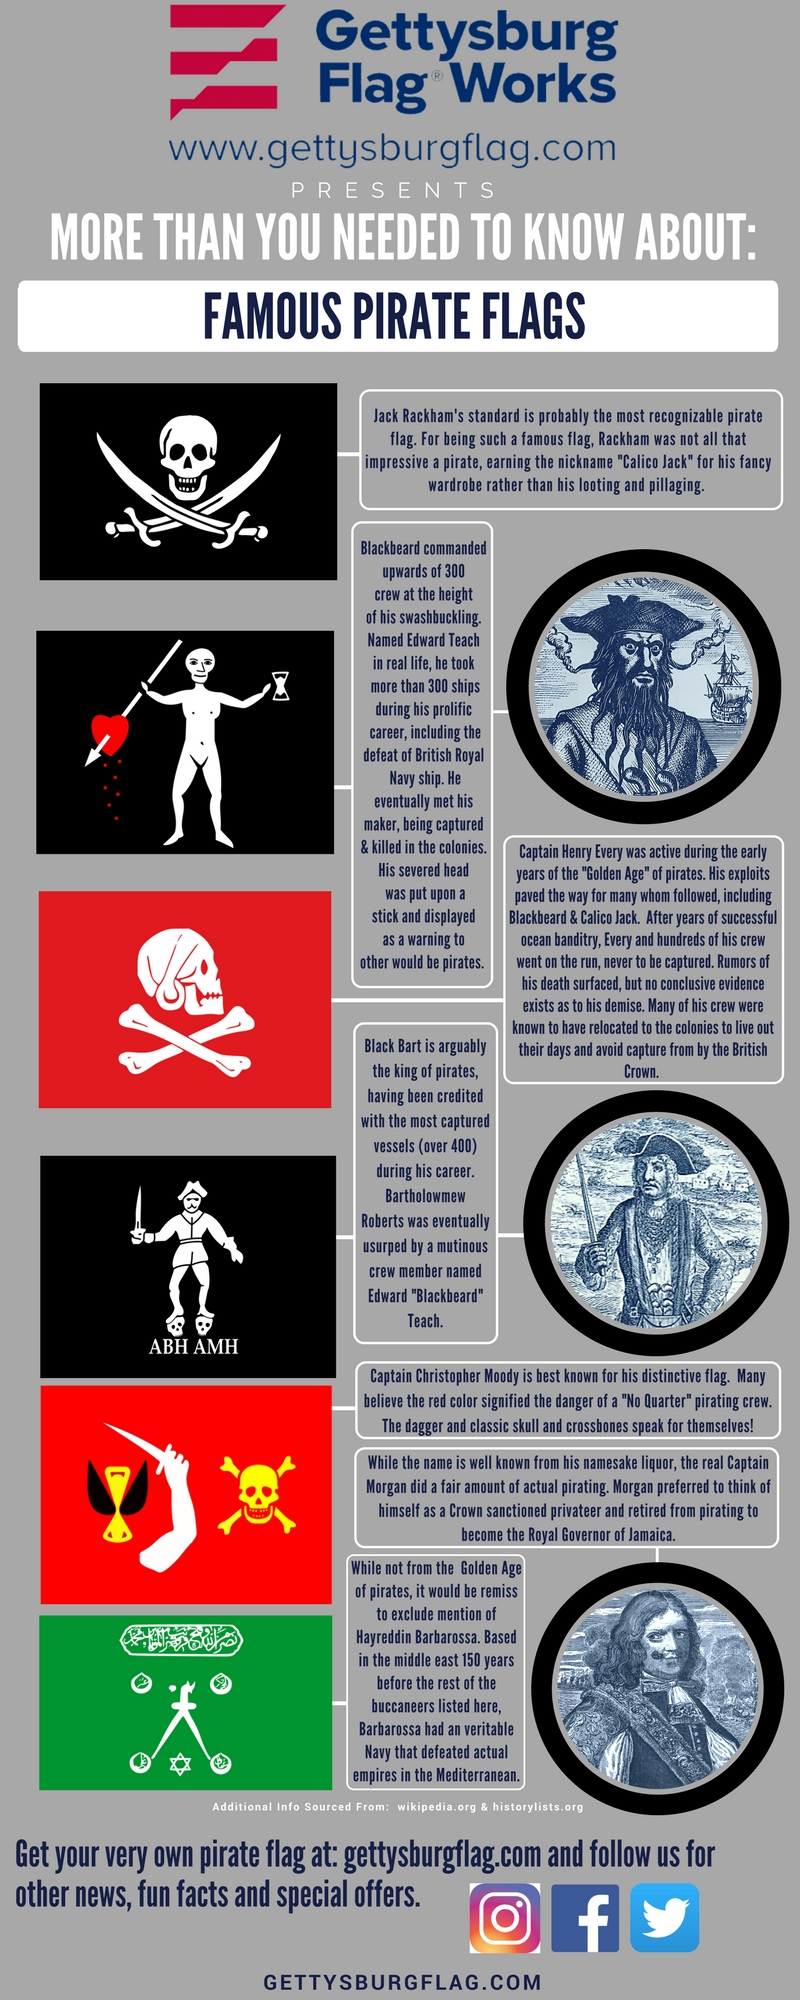 Jolly Roger : Pirate Flag Meanings and Origin